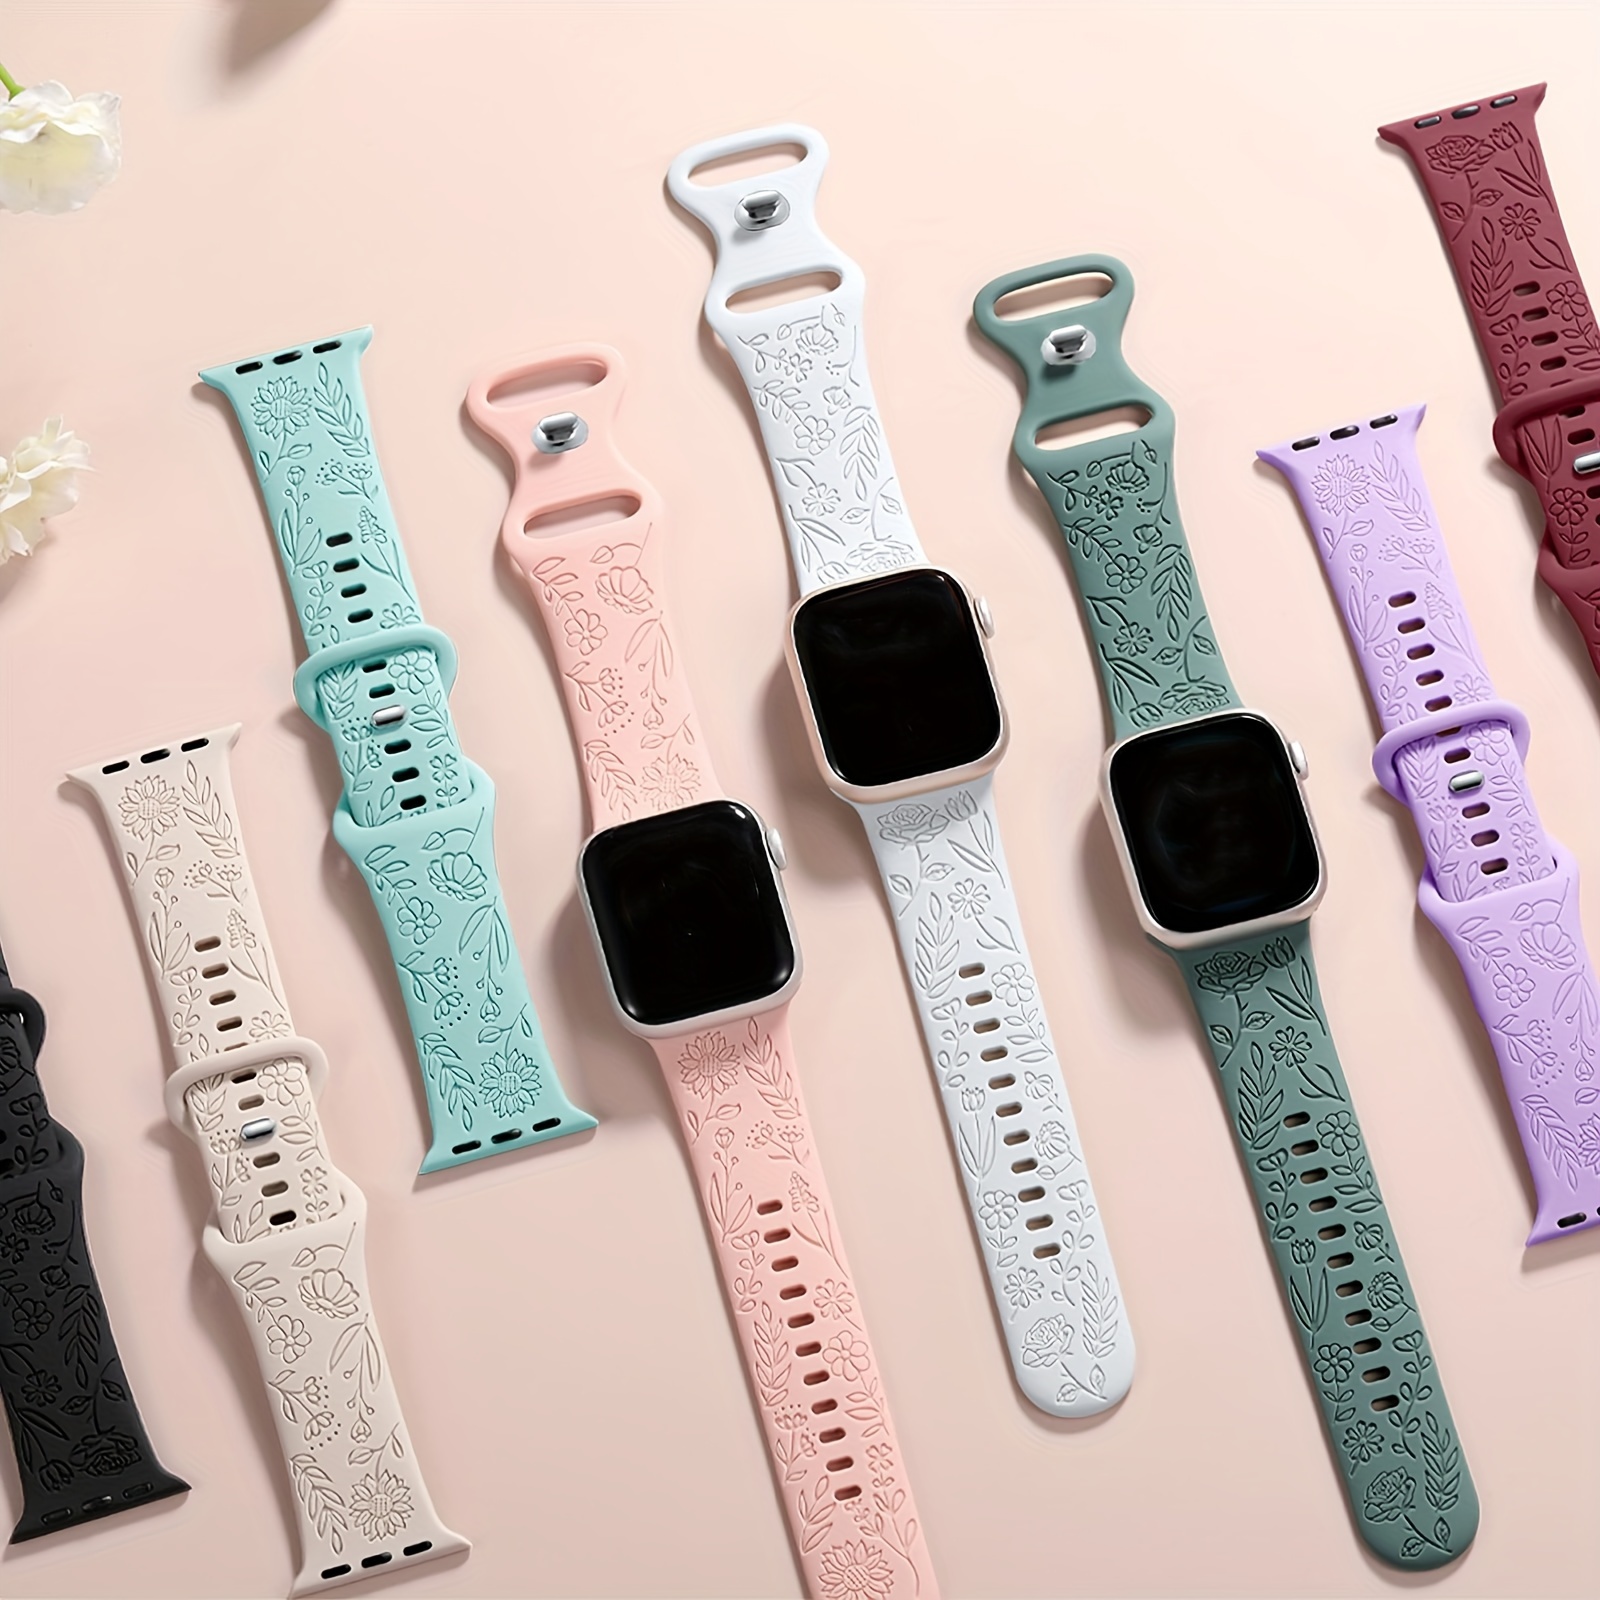 

8 Pack Floral Engraved Watch Bands For Women Iwatch Soft Silicone Dressy Wrist Straps All-day Comfort Accessory